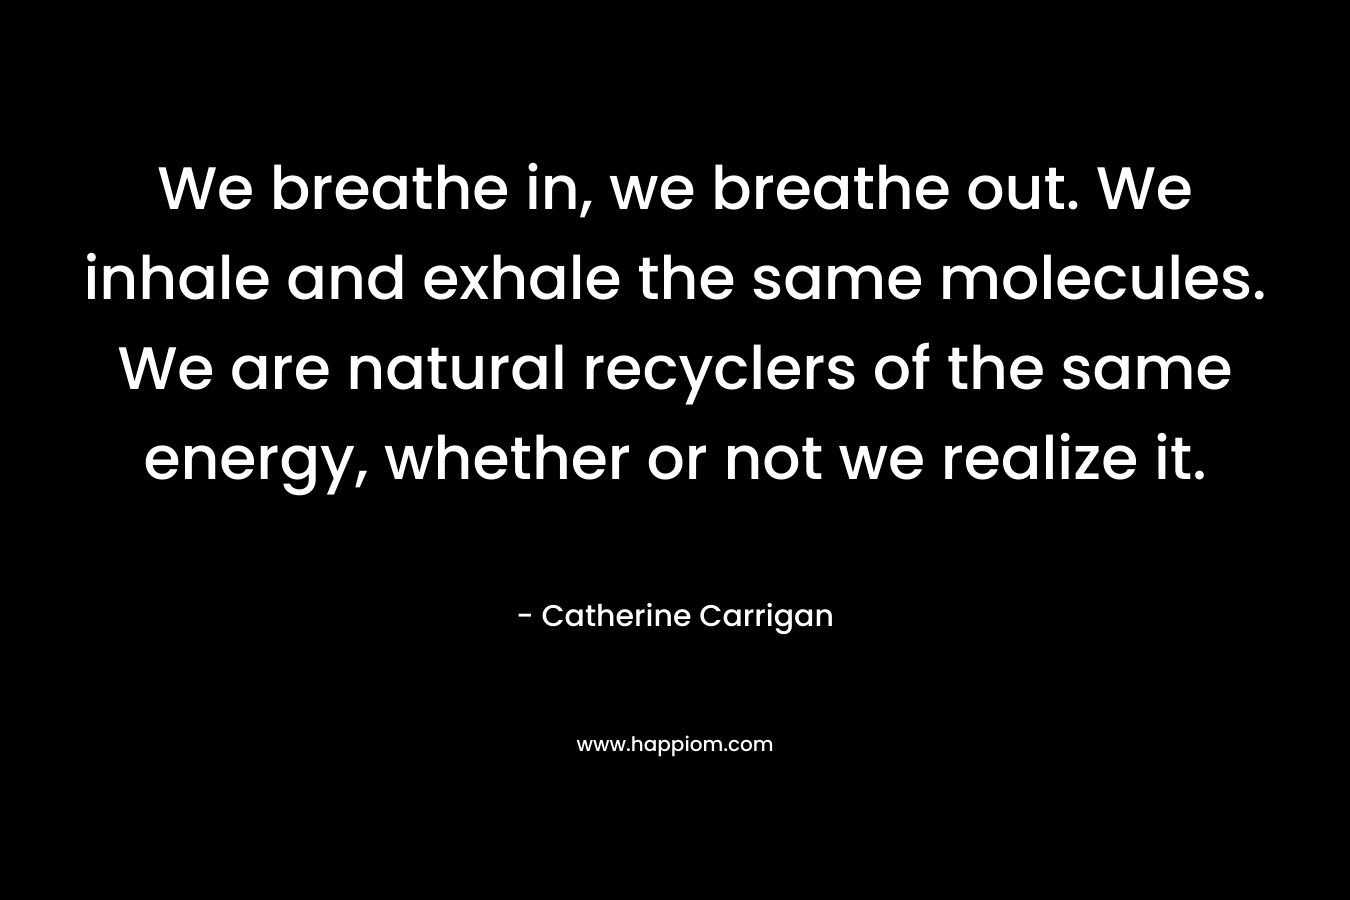 We breathe in, we breathe out. We inhale and exhale the same molecules. We are natural recyclers of the same energy, whether or not we realize it.